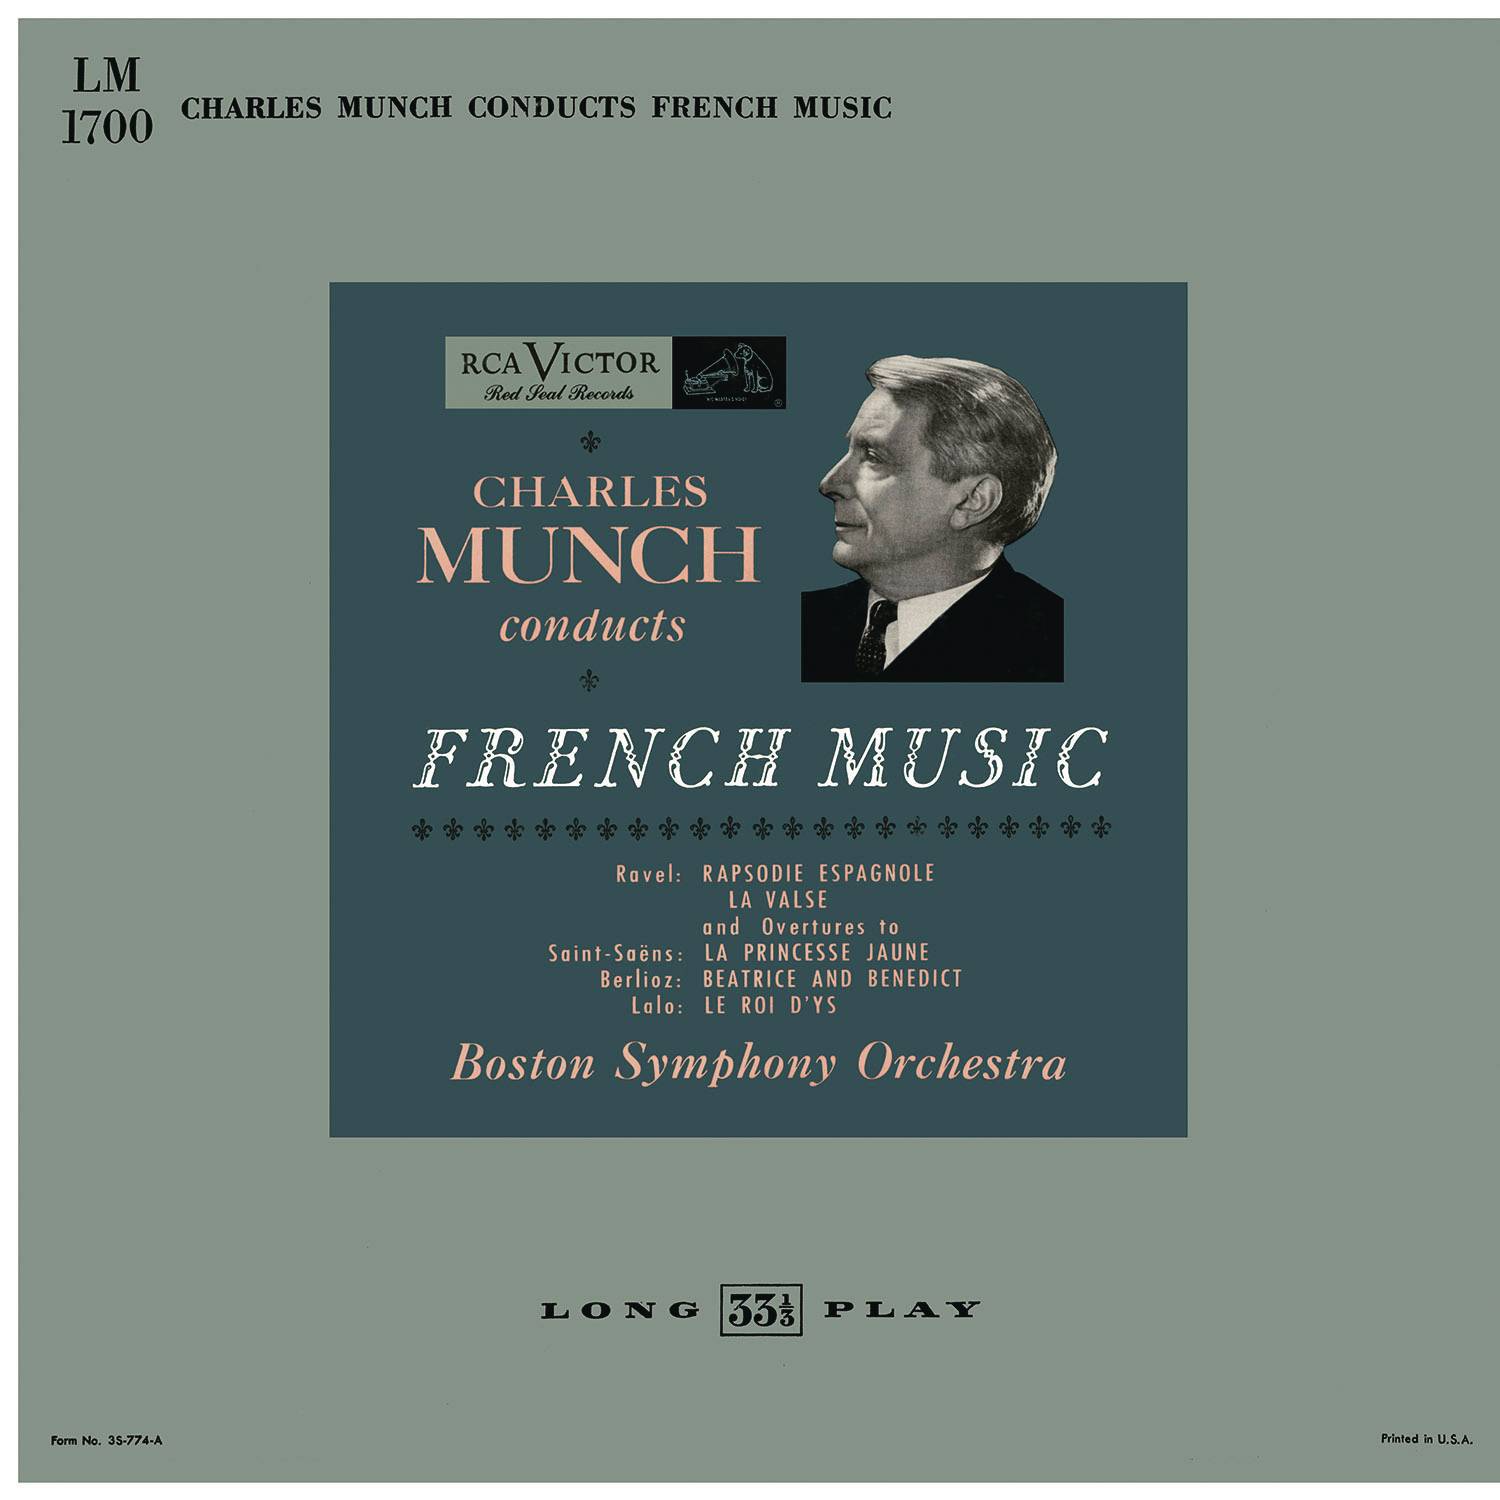 Charles Munch Conducts French Music: Ravel, Saint-Saëns, Berlioz and Lalo